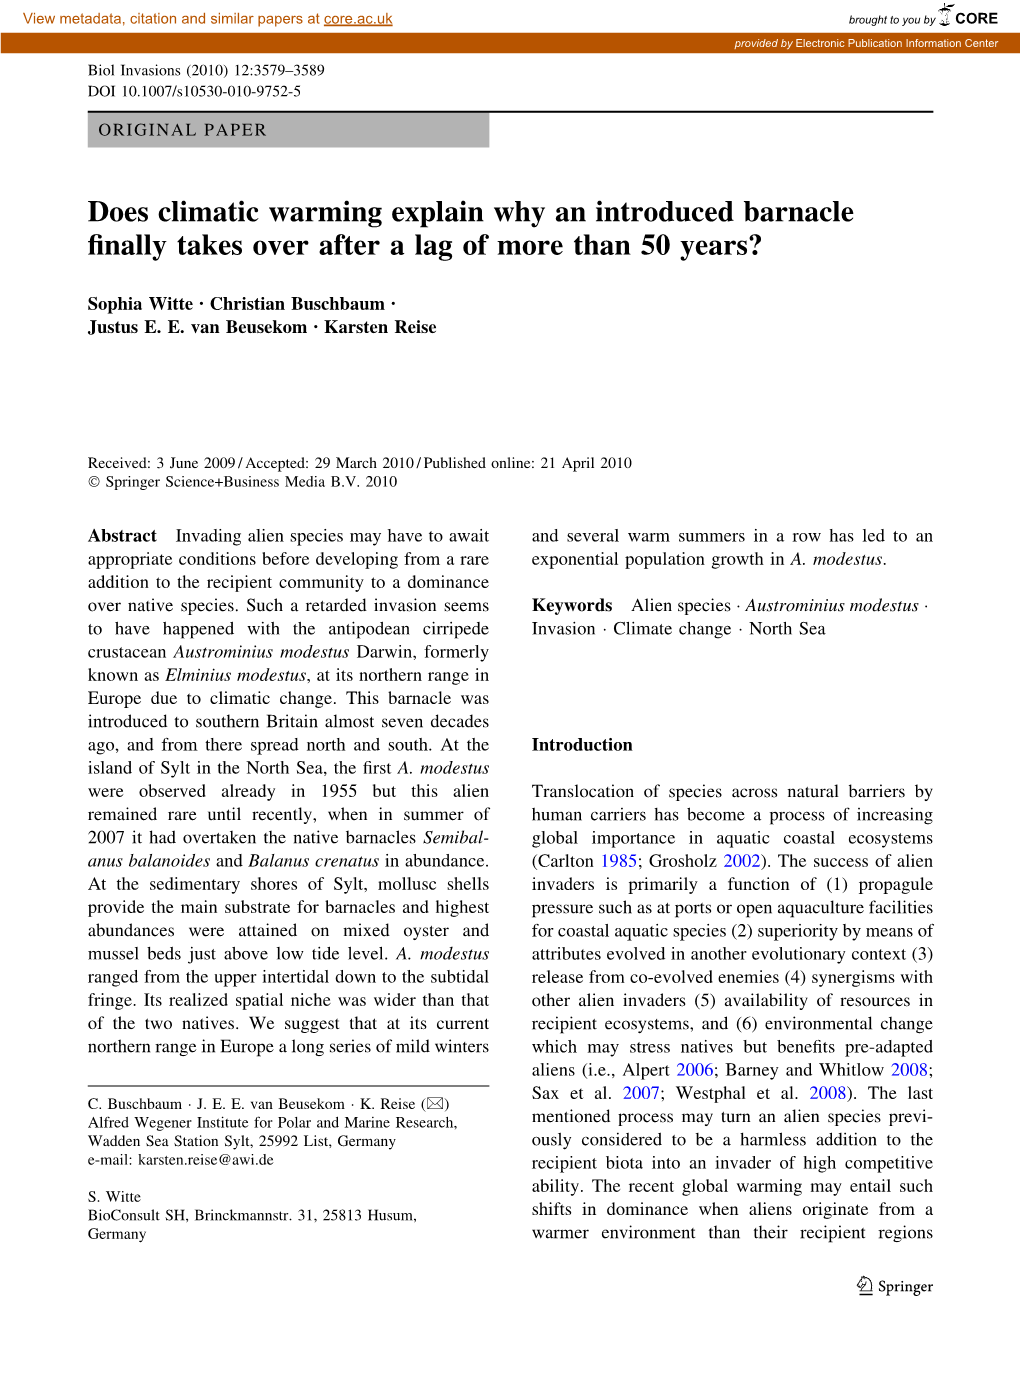 Does Climatic Warming Explain Why an Introduced Barnacle Finally Takes